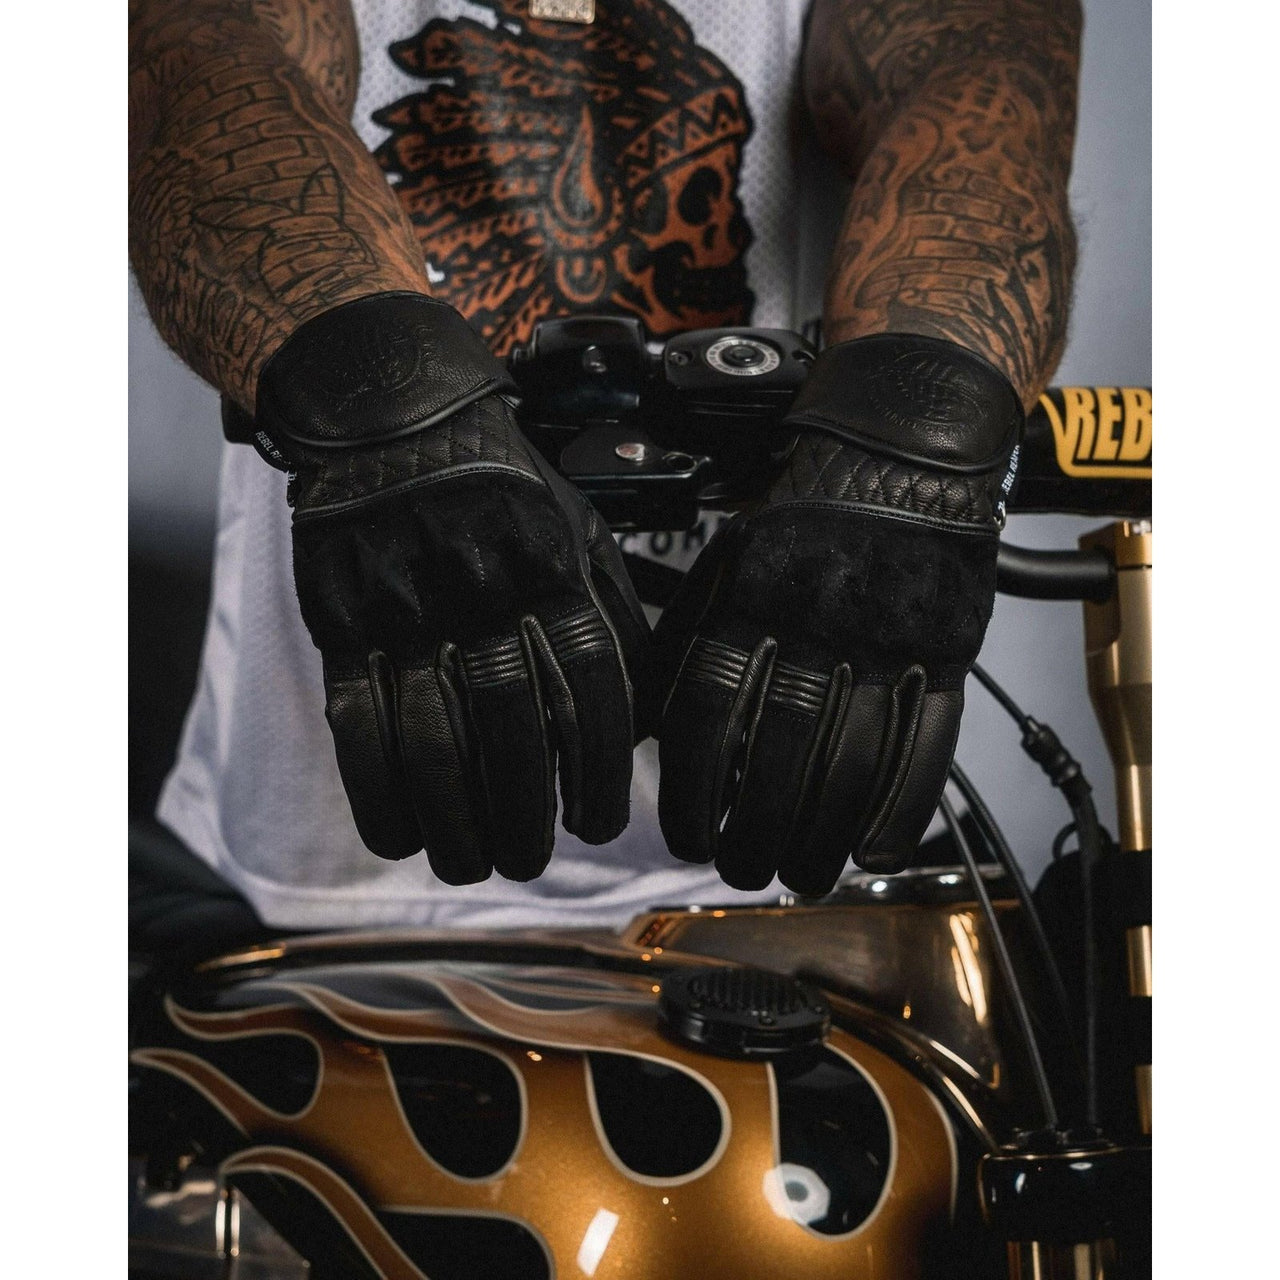 Leather Motorcycle Riding Gloves - Modern Roper - Black Suede